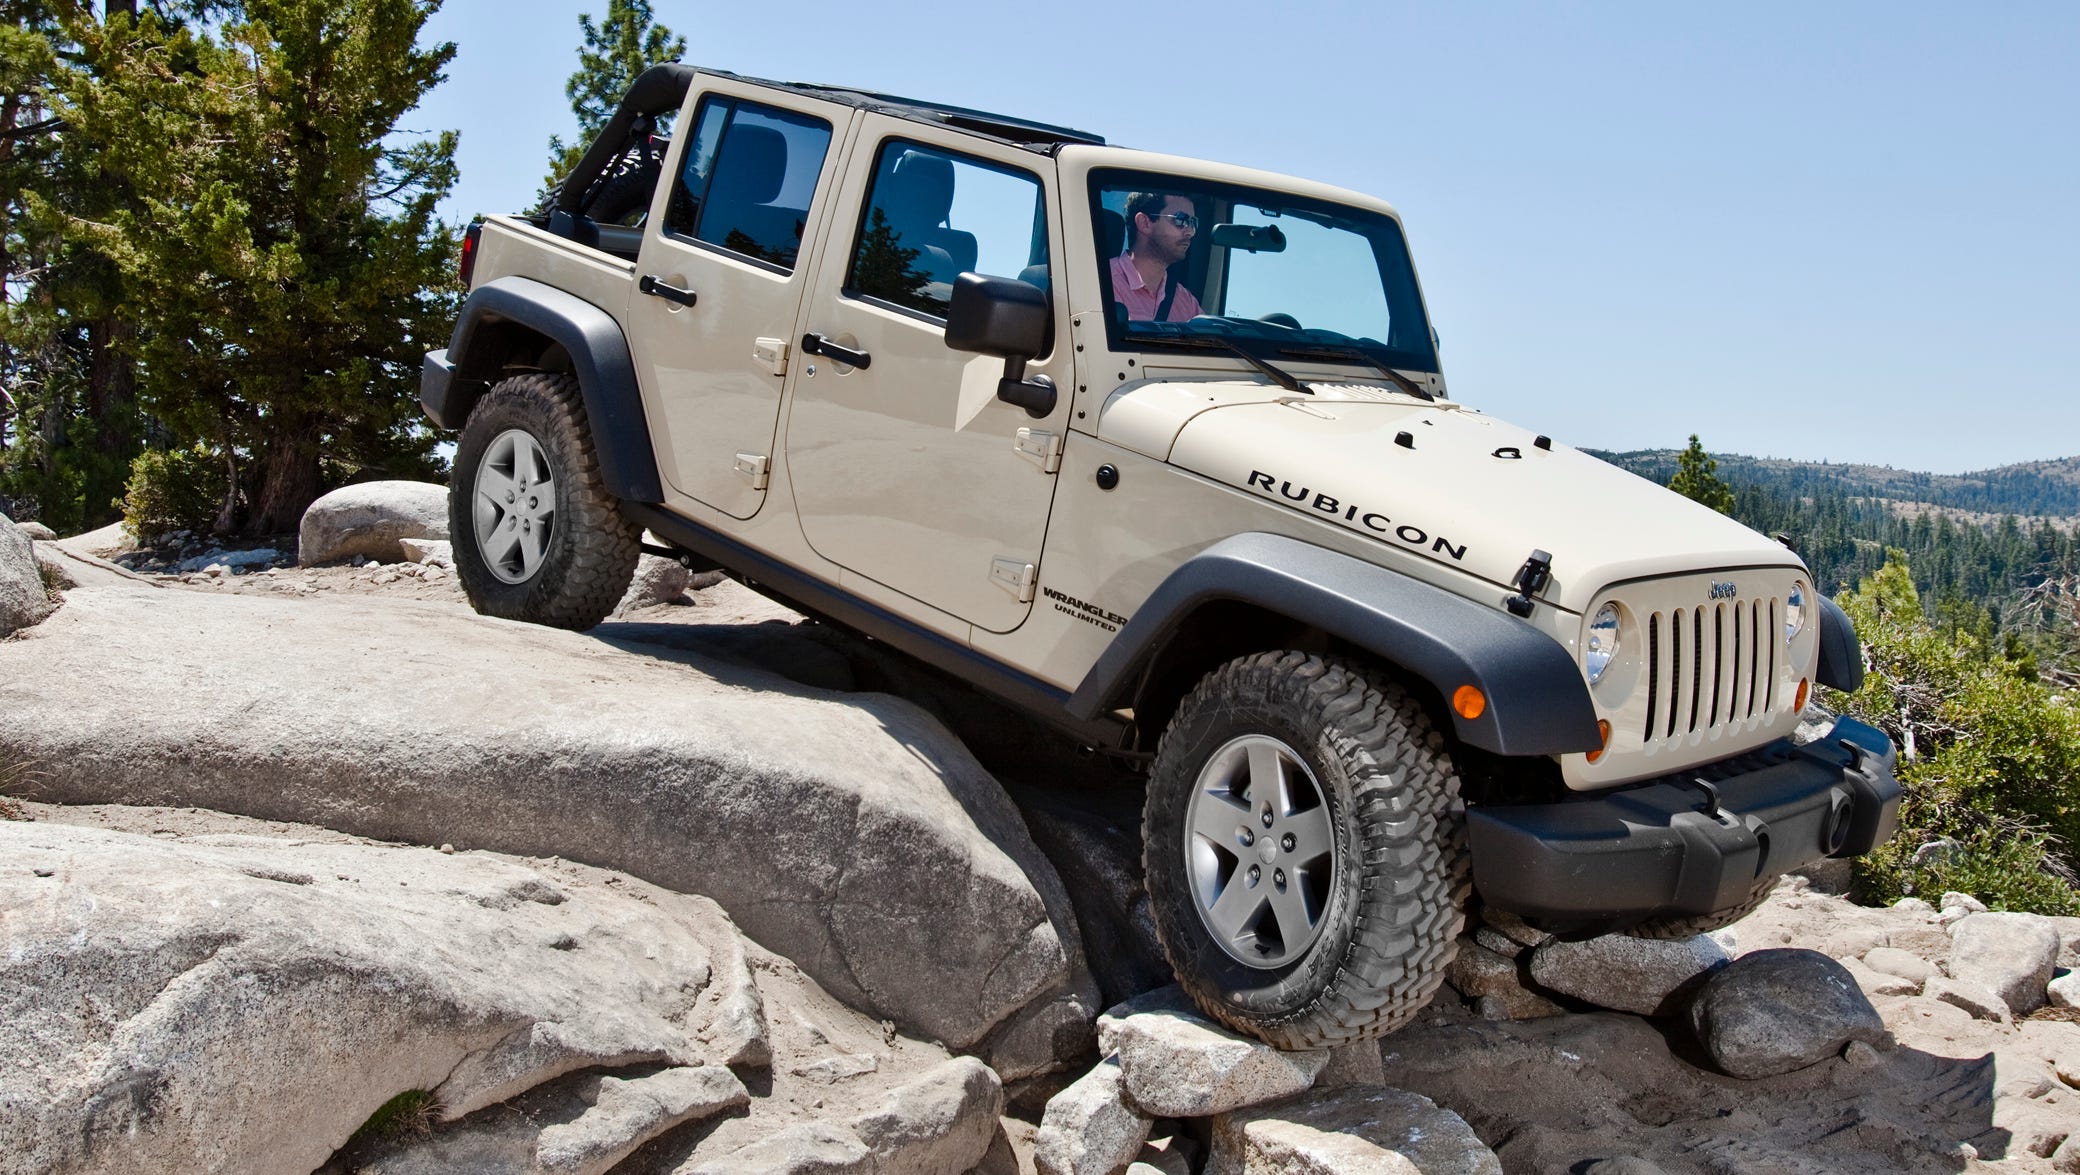 Jeep tops 'Consumer Reports' list of worst car values